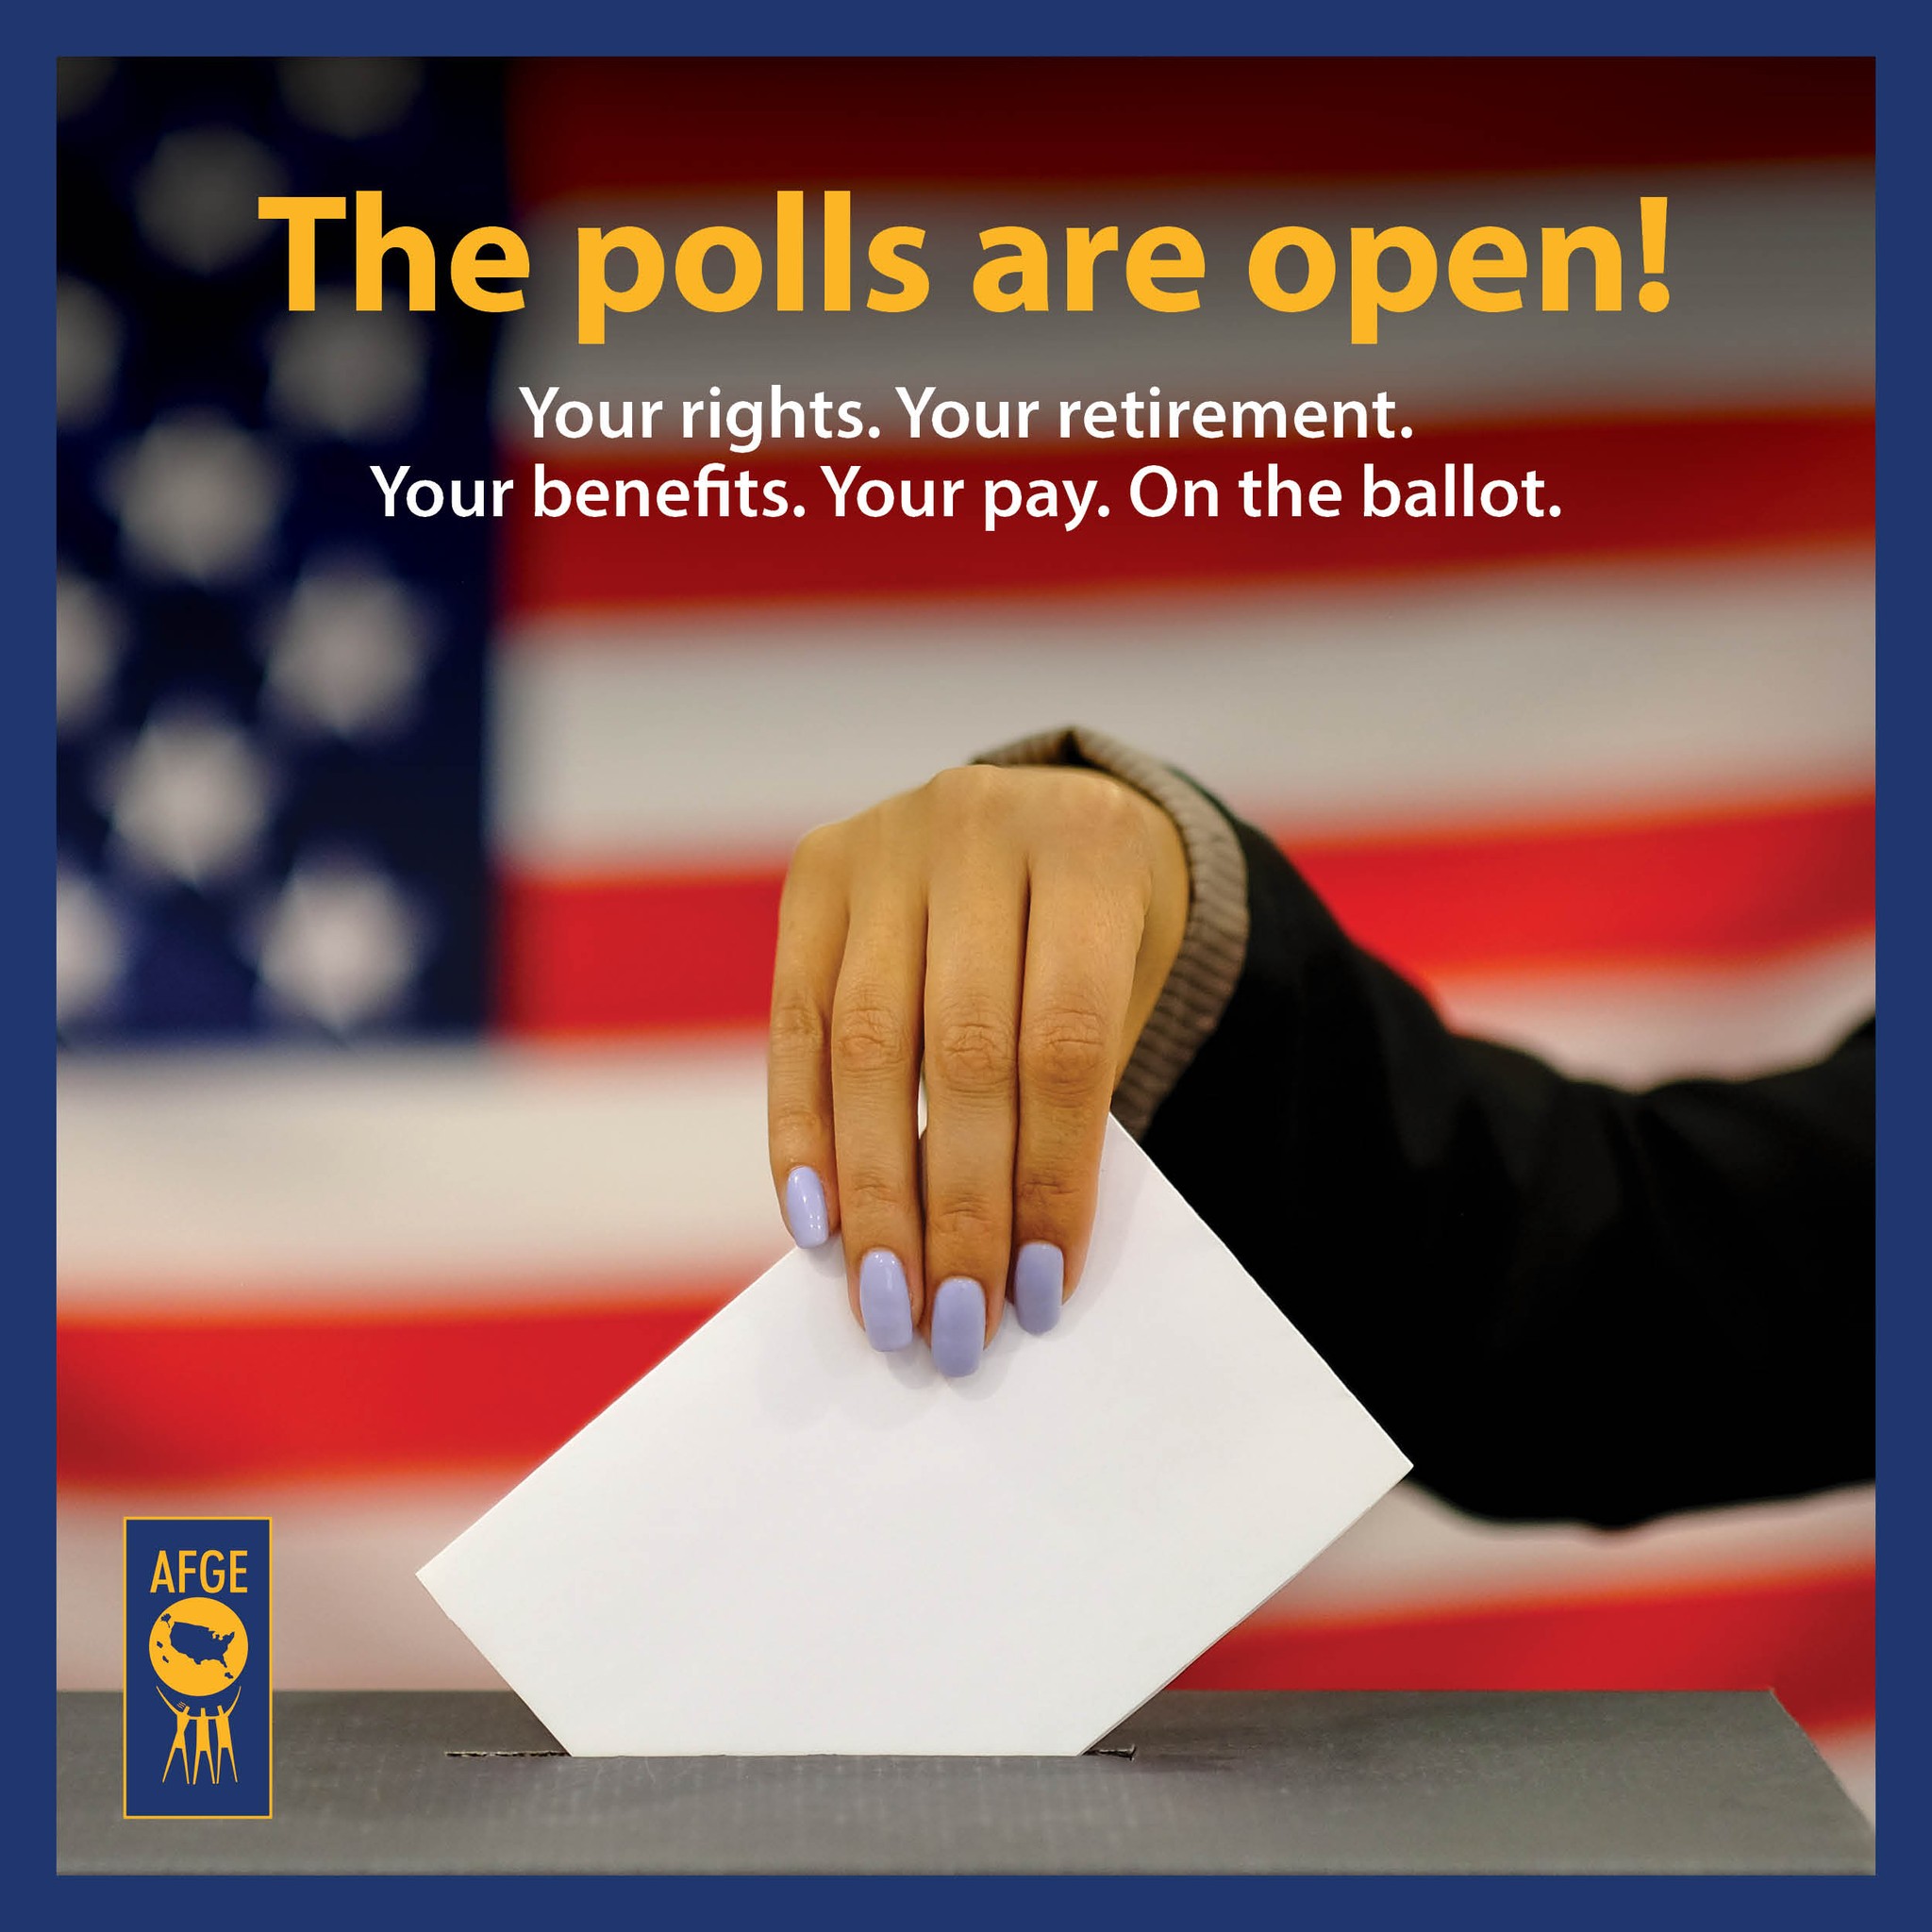 The polls are open graphic